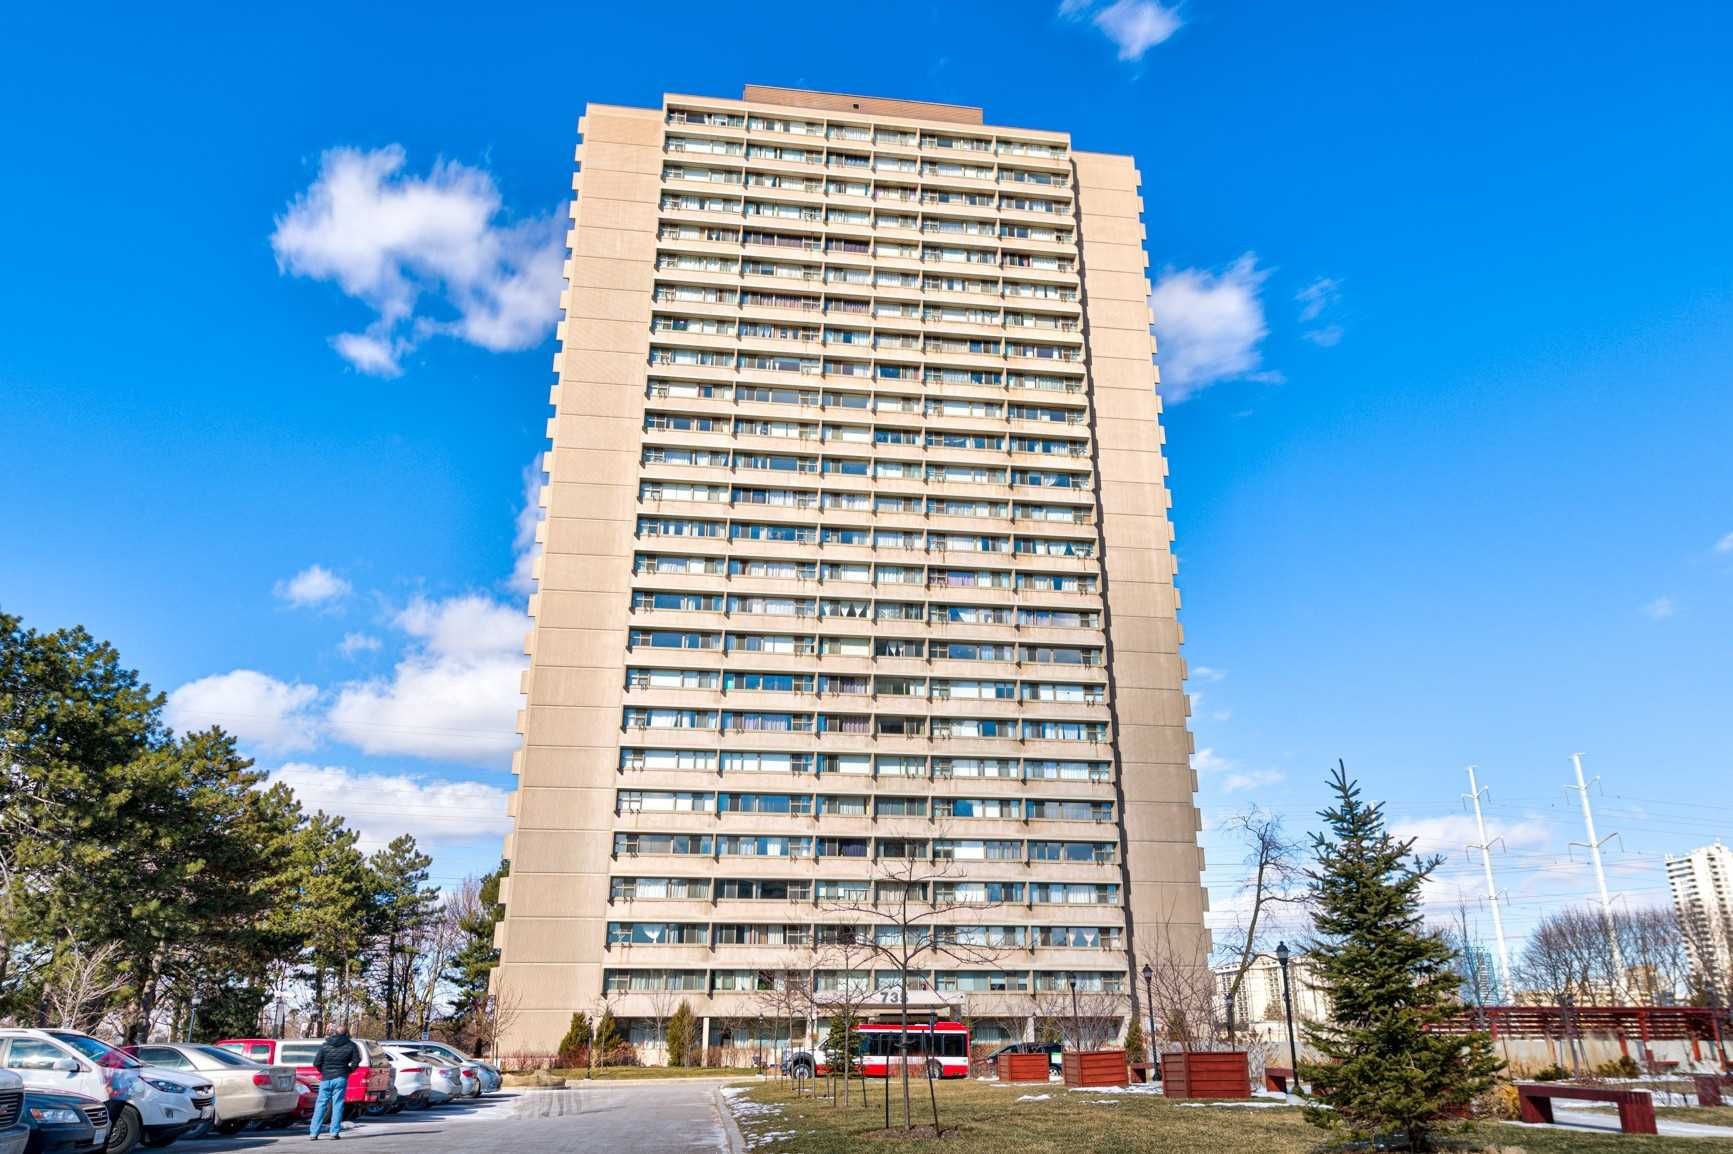 715-735 Don Mills Rd. This condo at 715 Don Mills Condos is located in  North York, Toronto - image #1 of 2 by Strata.ca